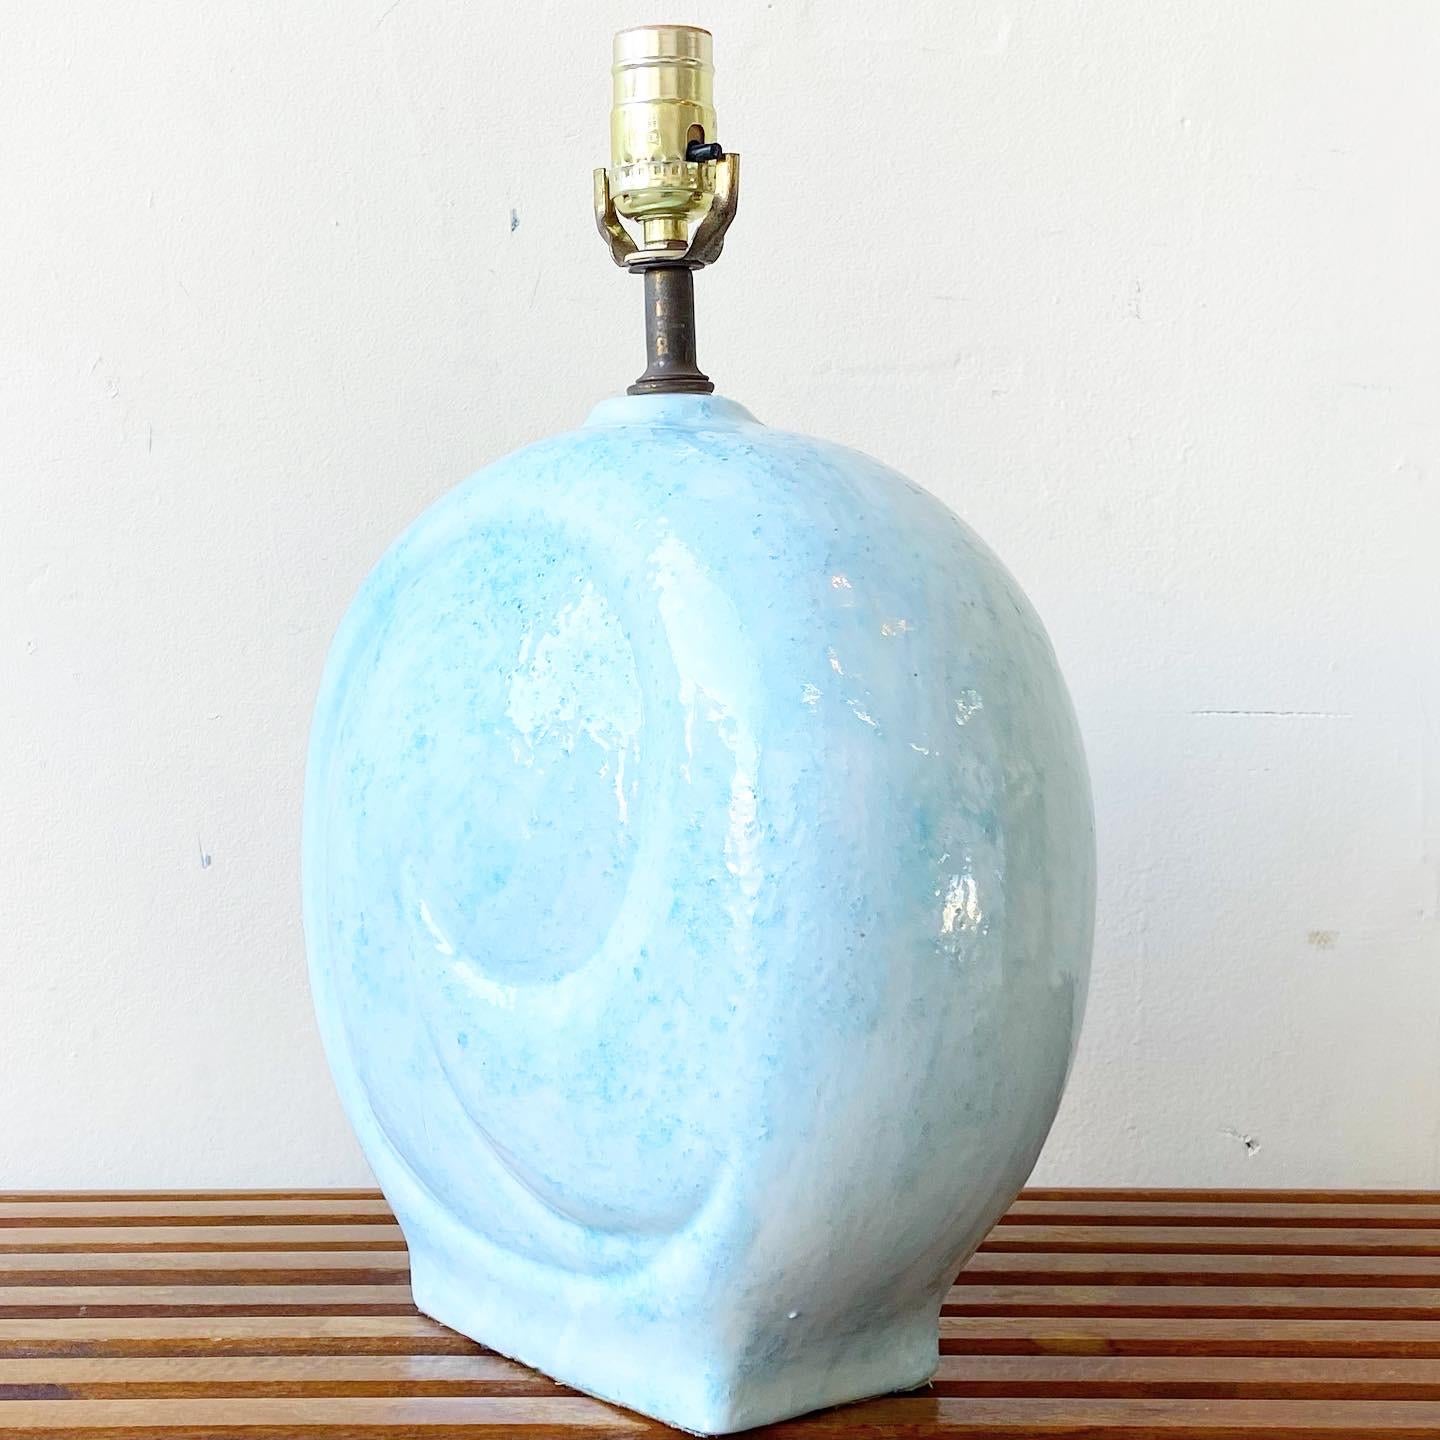 Incredible ceramic table lamp. Displays a beautiful baby blue sculpted circular swirl shape.

Additional information:
Material: Ceramic
Color: Blue
Style: Postmodern
Time Period: 
Place of origin: USA
Dimension: 9